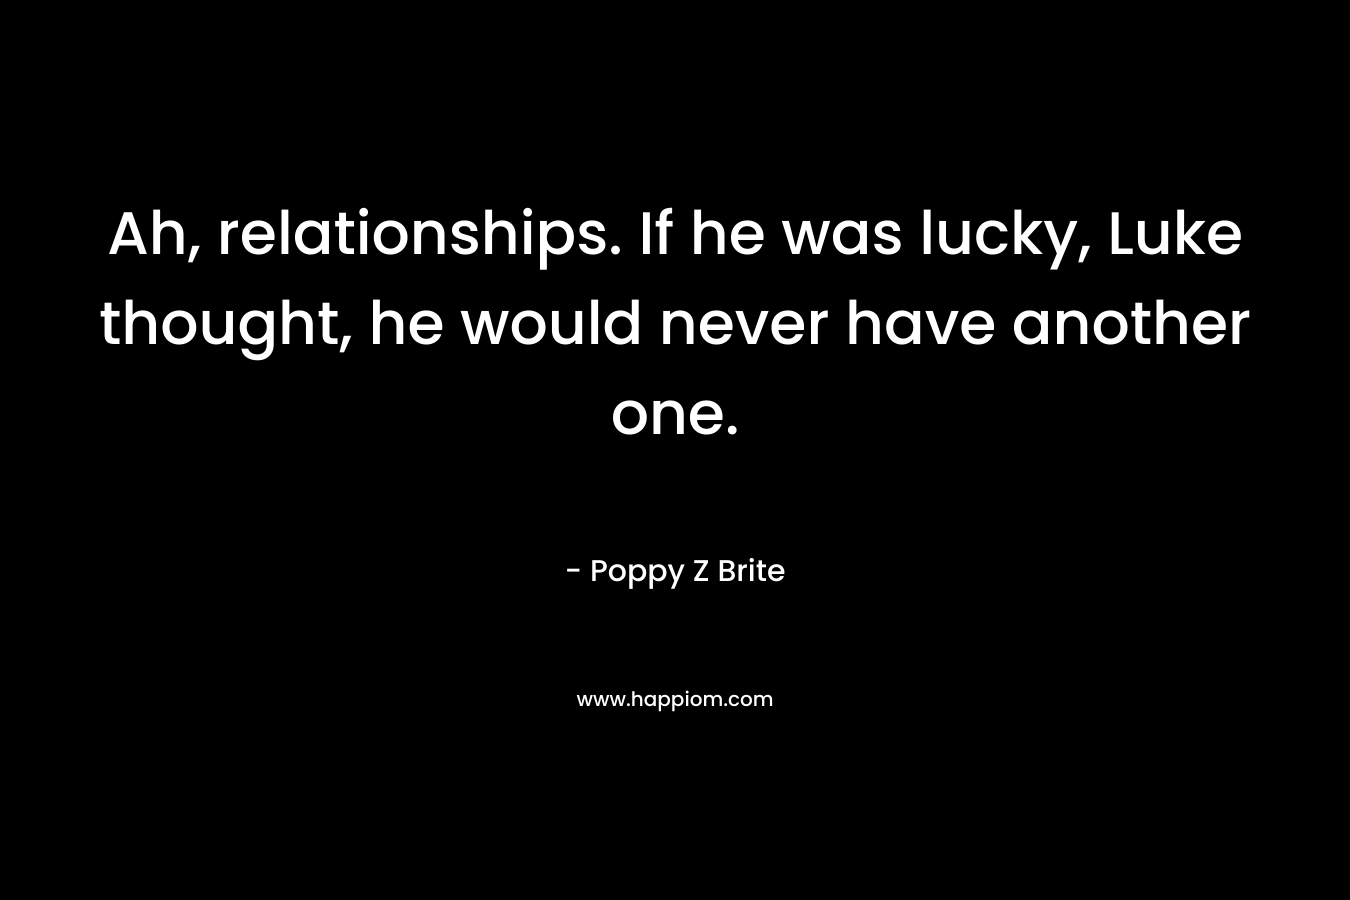 Ah, relationships. If he was lucky, Luke thought, he would never have another one. – Poppy Z Brite